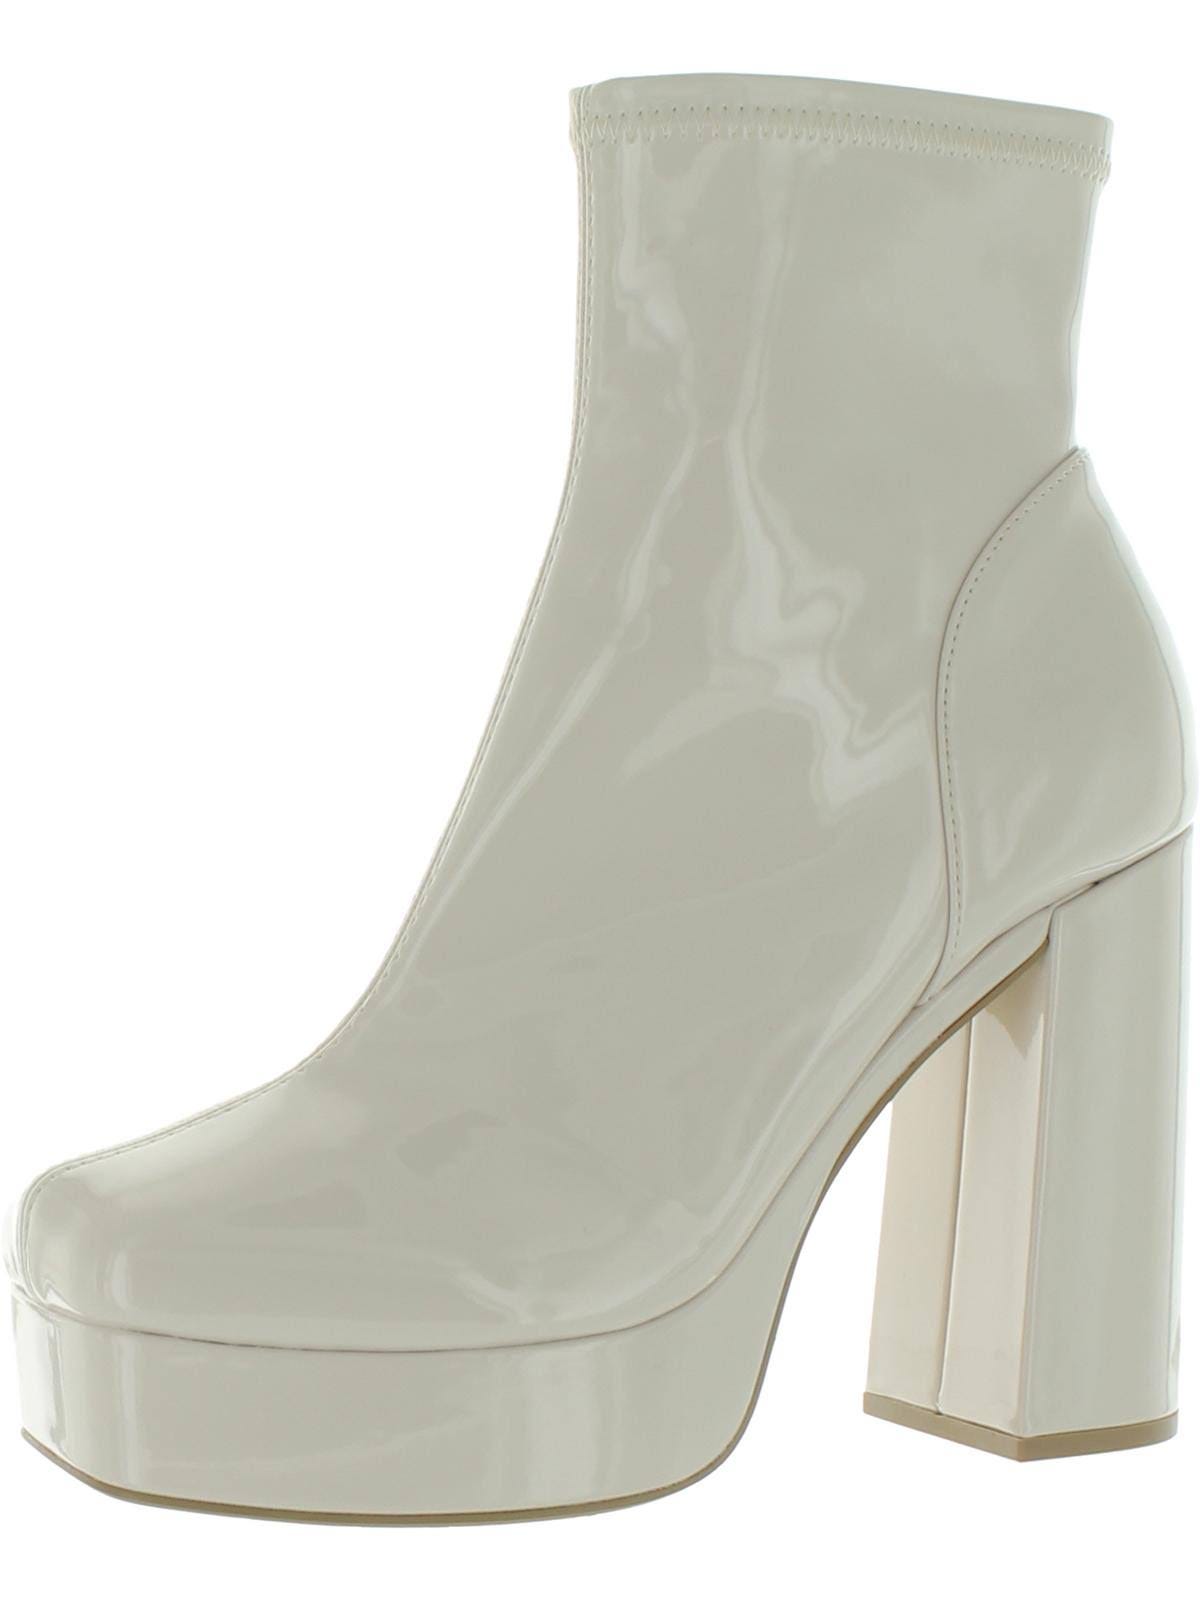 Fashionable Platform White Boots by Steve Madden | Image